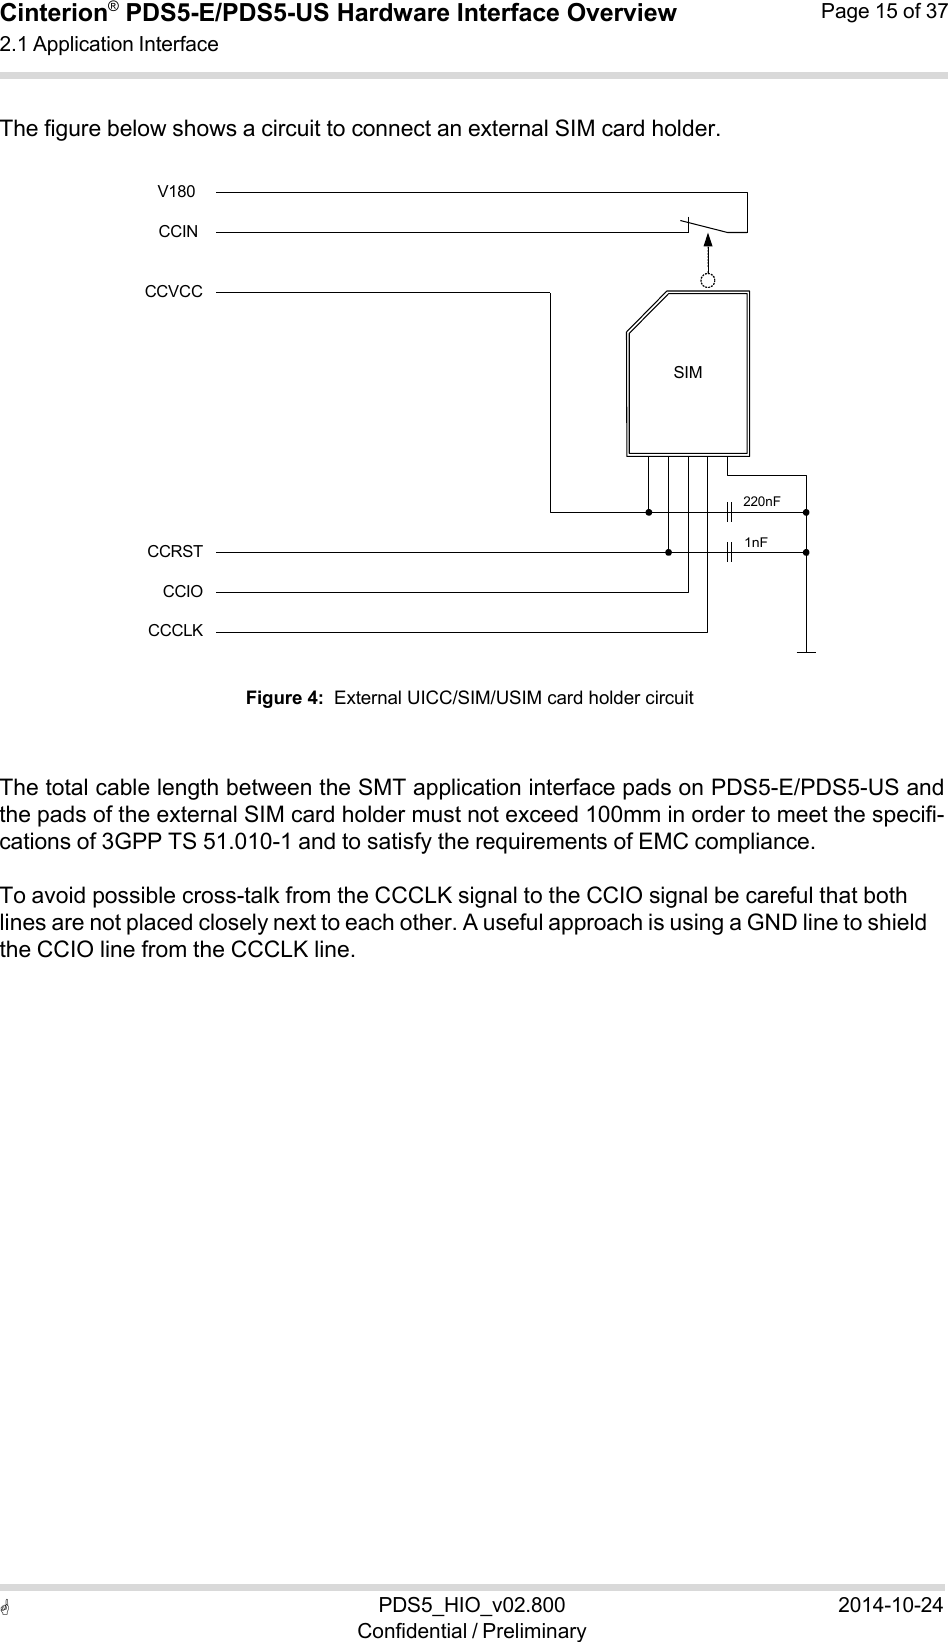  PDS5_HIO_v02.800Confidential / Preliminary2014-10-24Cinterion®  PDS5-E/PDS5-US Hardware Interface Overview2.1 Application Interface Page 15 of 37   1nF SIM220nF  The figure below shows a circuit to connect an external SIM card holder.  V180  CCIN  CCVCC             CCRST CCIO CCCLK  Figure 4:  External UICC/SIM/USIM card holder circuit    The total cable length between the SMT application interface pads on PDS5-E/PDS5-US and the pads of the external SIM card holder must not exceed 100mm in order to meet the specifi- cations of 3GPP TS 51.010-1 and to satisfy the requirements of EMC compliance.  To avoid possible cross-talk from the CCCLK signal to the CCIO signal be careful that both lines are not placed closely next to each other. A useful approach is using a GND line to shield the CCIO line from the CCCLK line. 